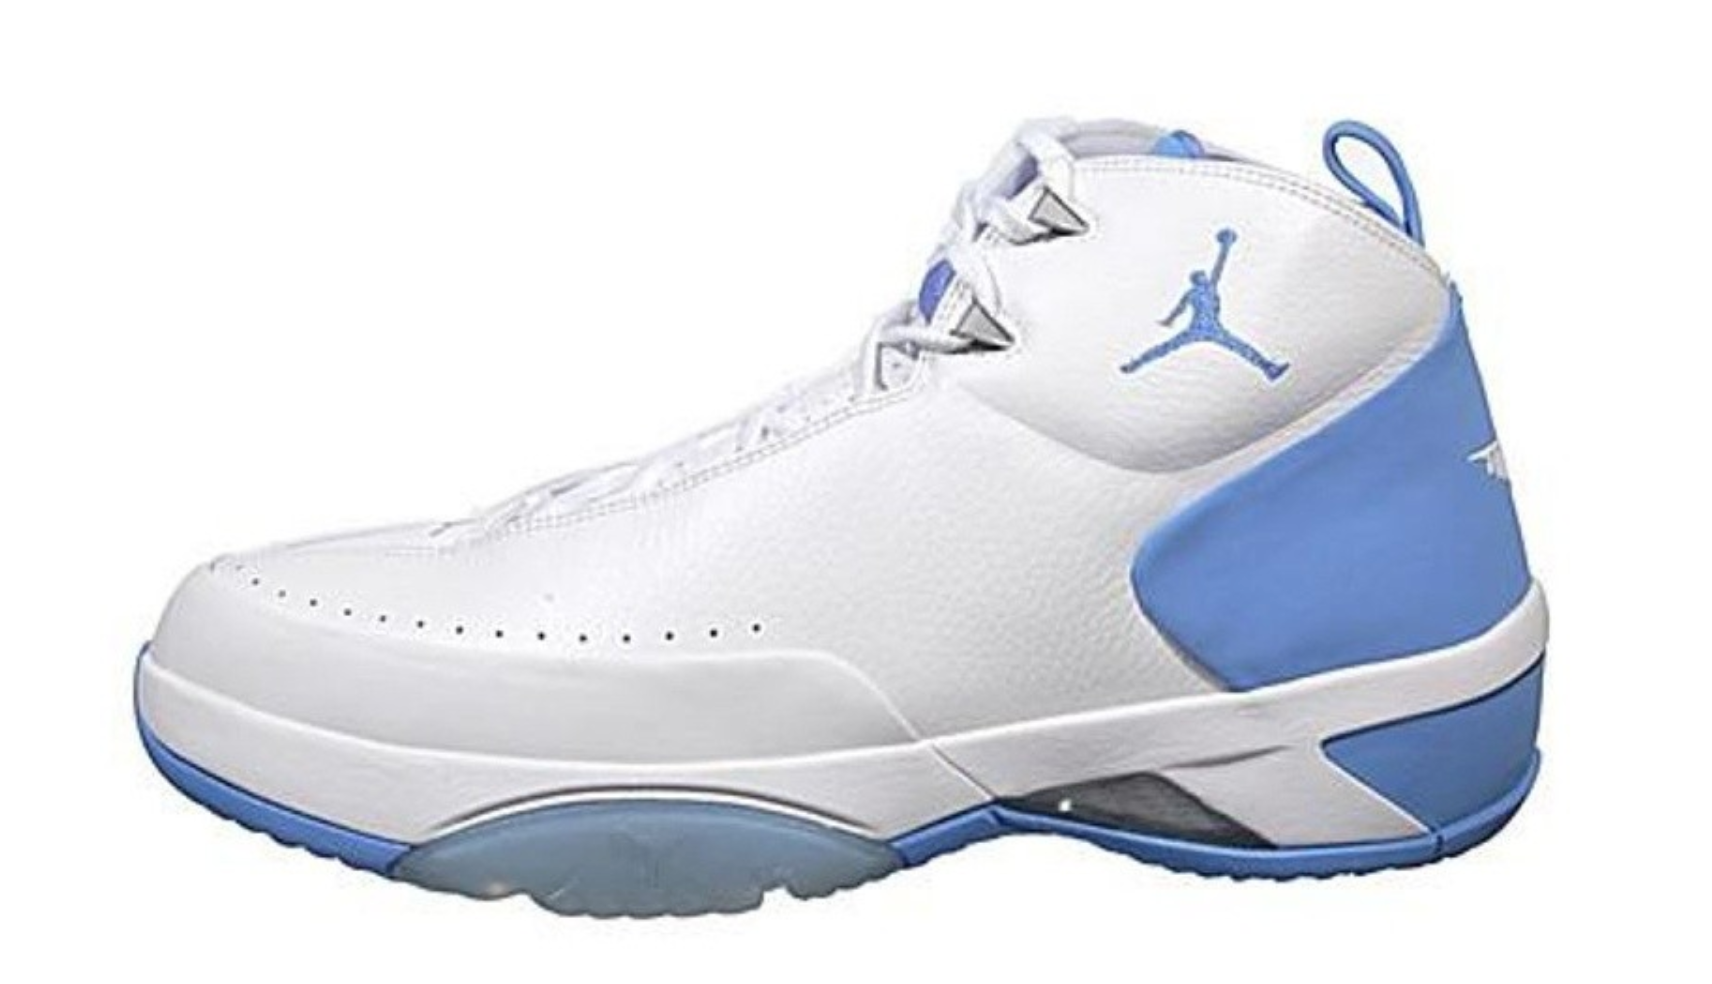 Revive Your Jumpman Melo M3 Sneakers